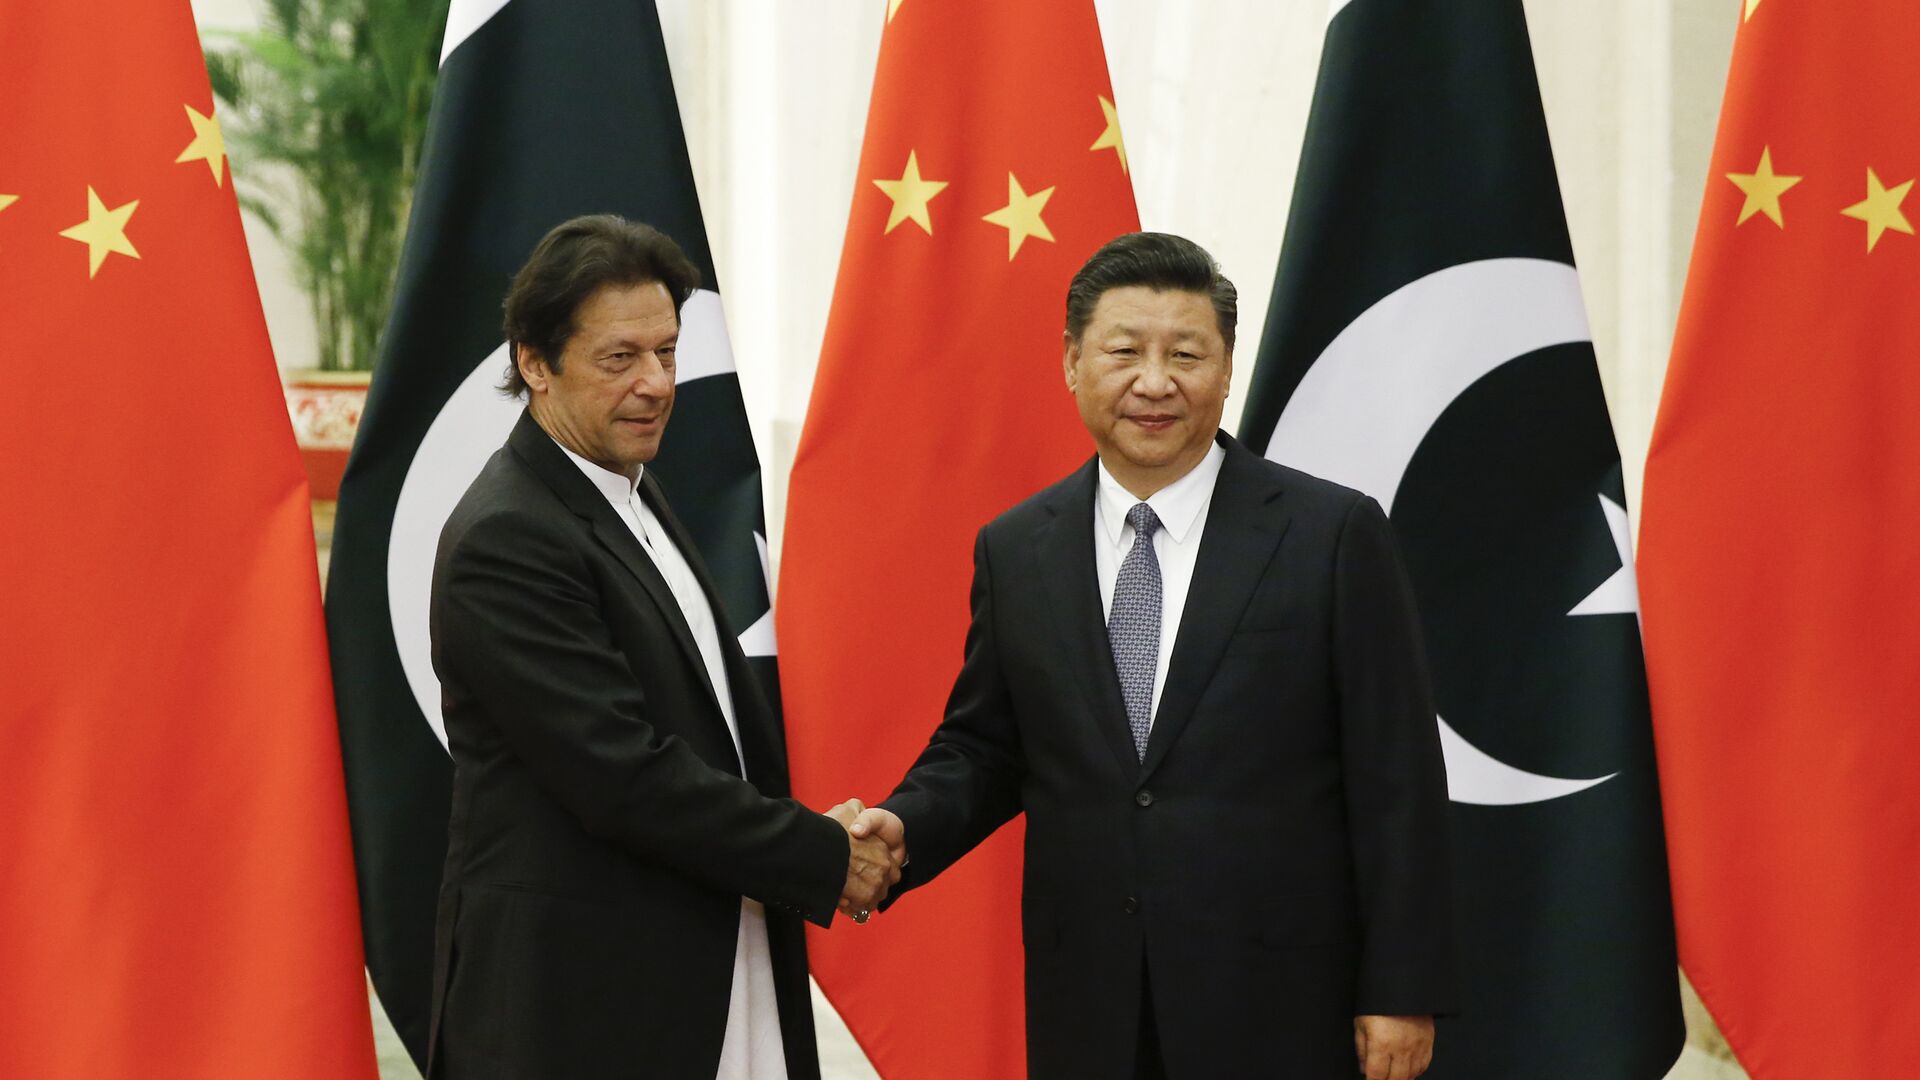 China's President Xi Jinping, right, meets Pakistan's Prime Minister Imran Khan at the Great Hall of the People in Beijing, Friday, Nov. 2, 2018 - Sputnik International, 1920, 03.02.2022